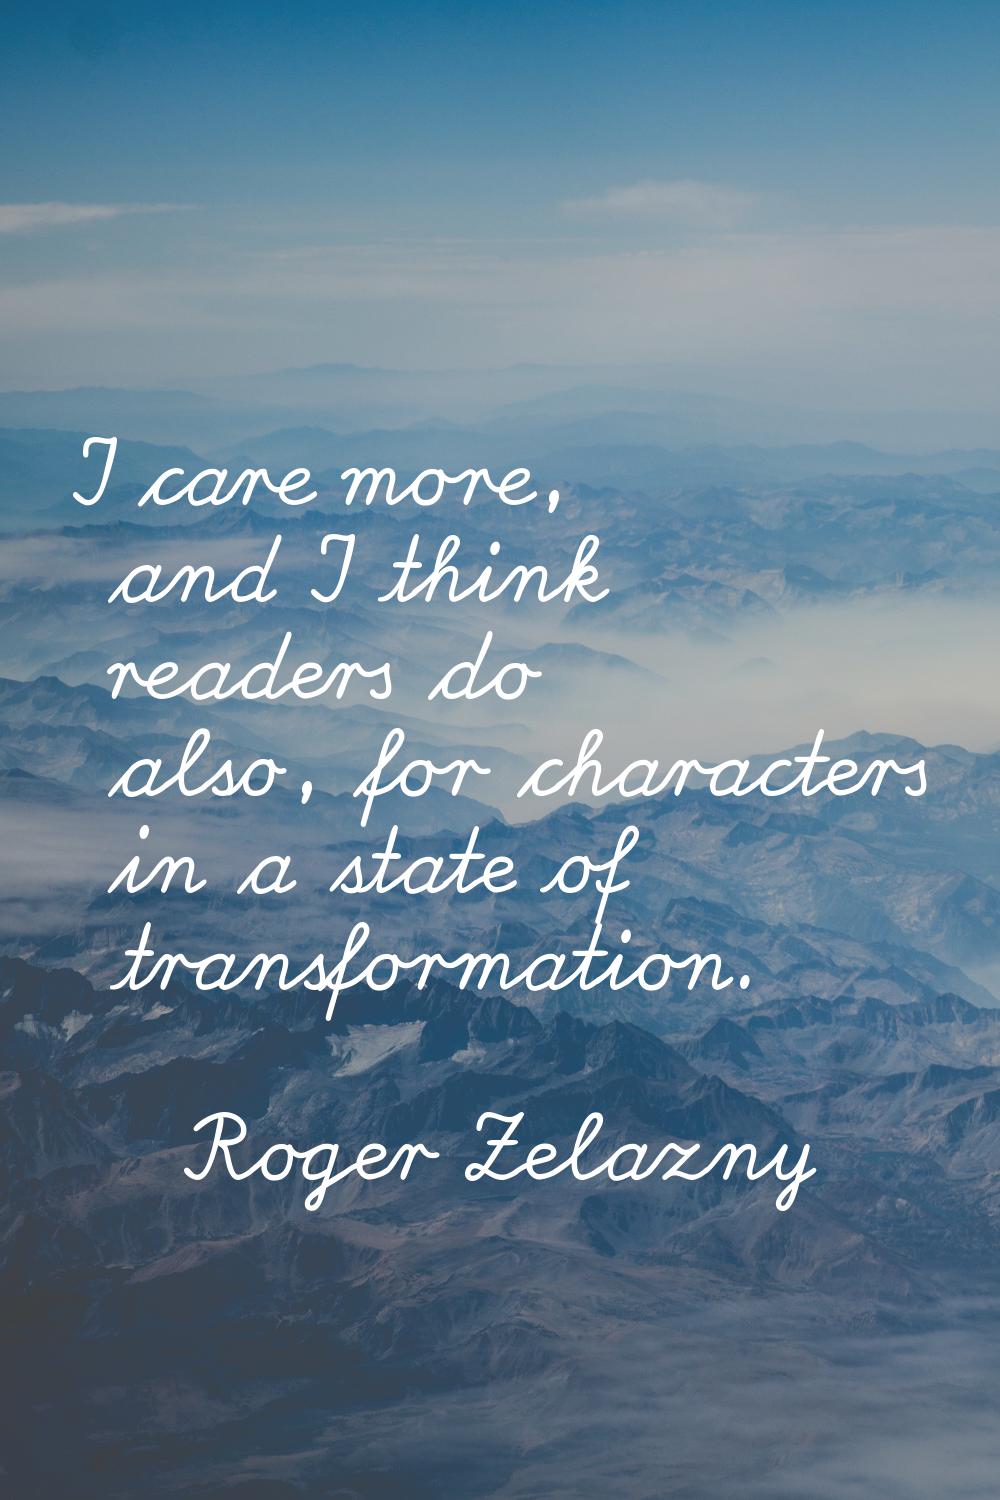 I care more, and I think readers do also, for characters in a state of transformation.